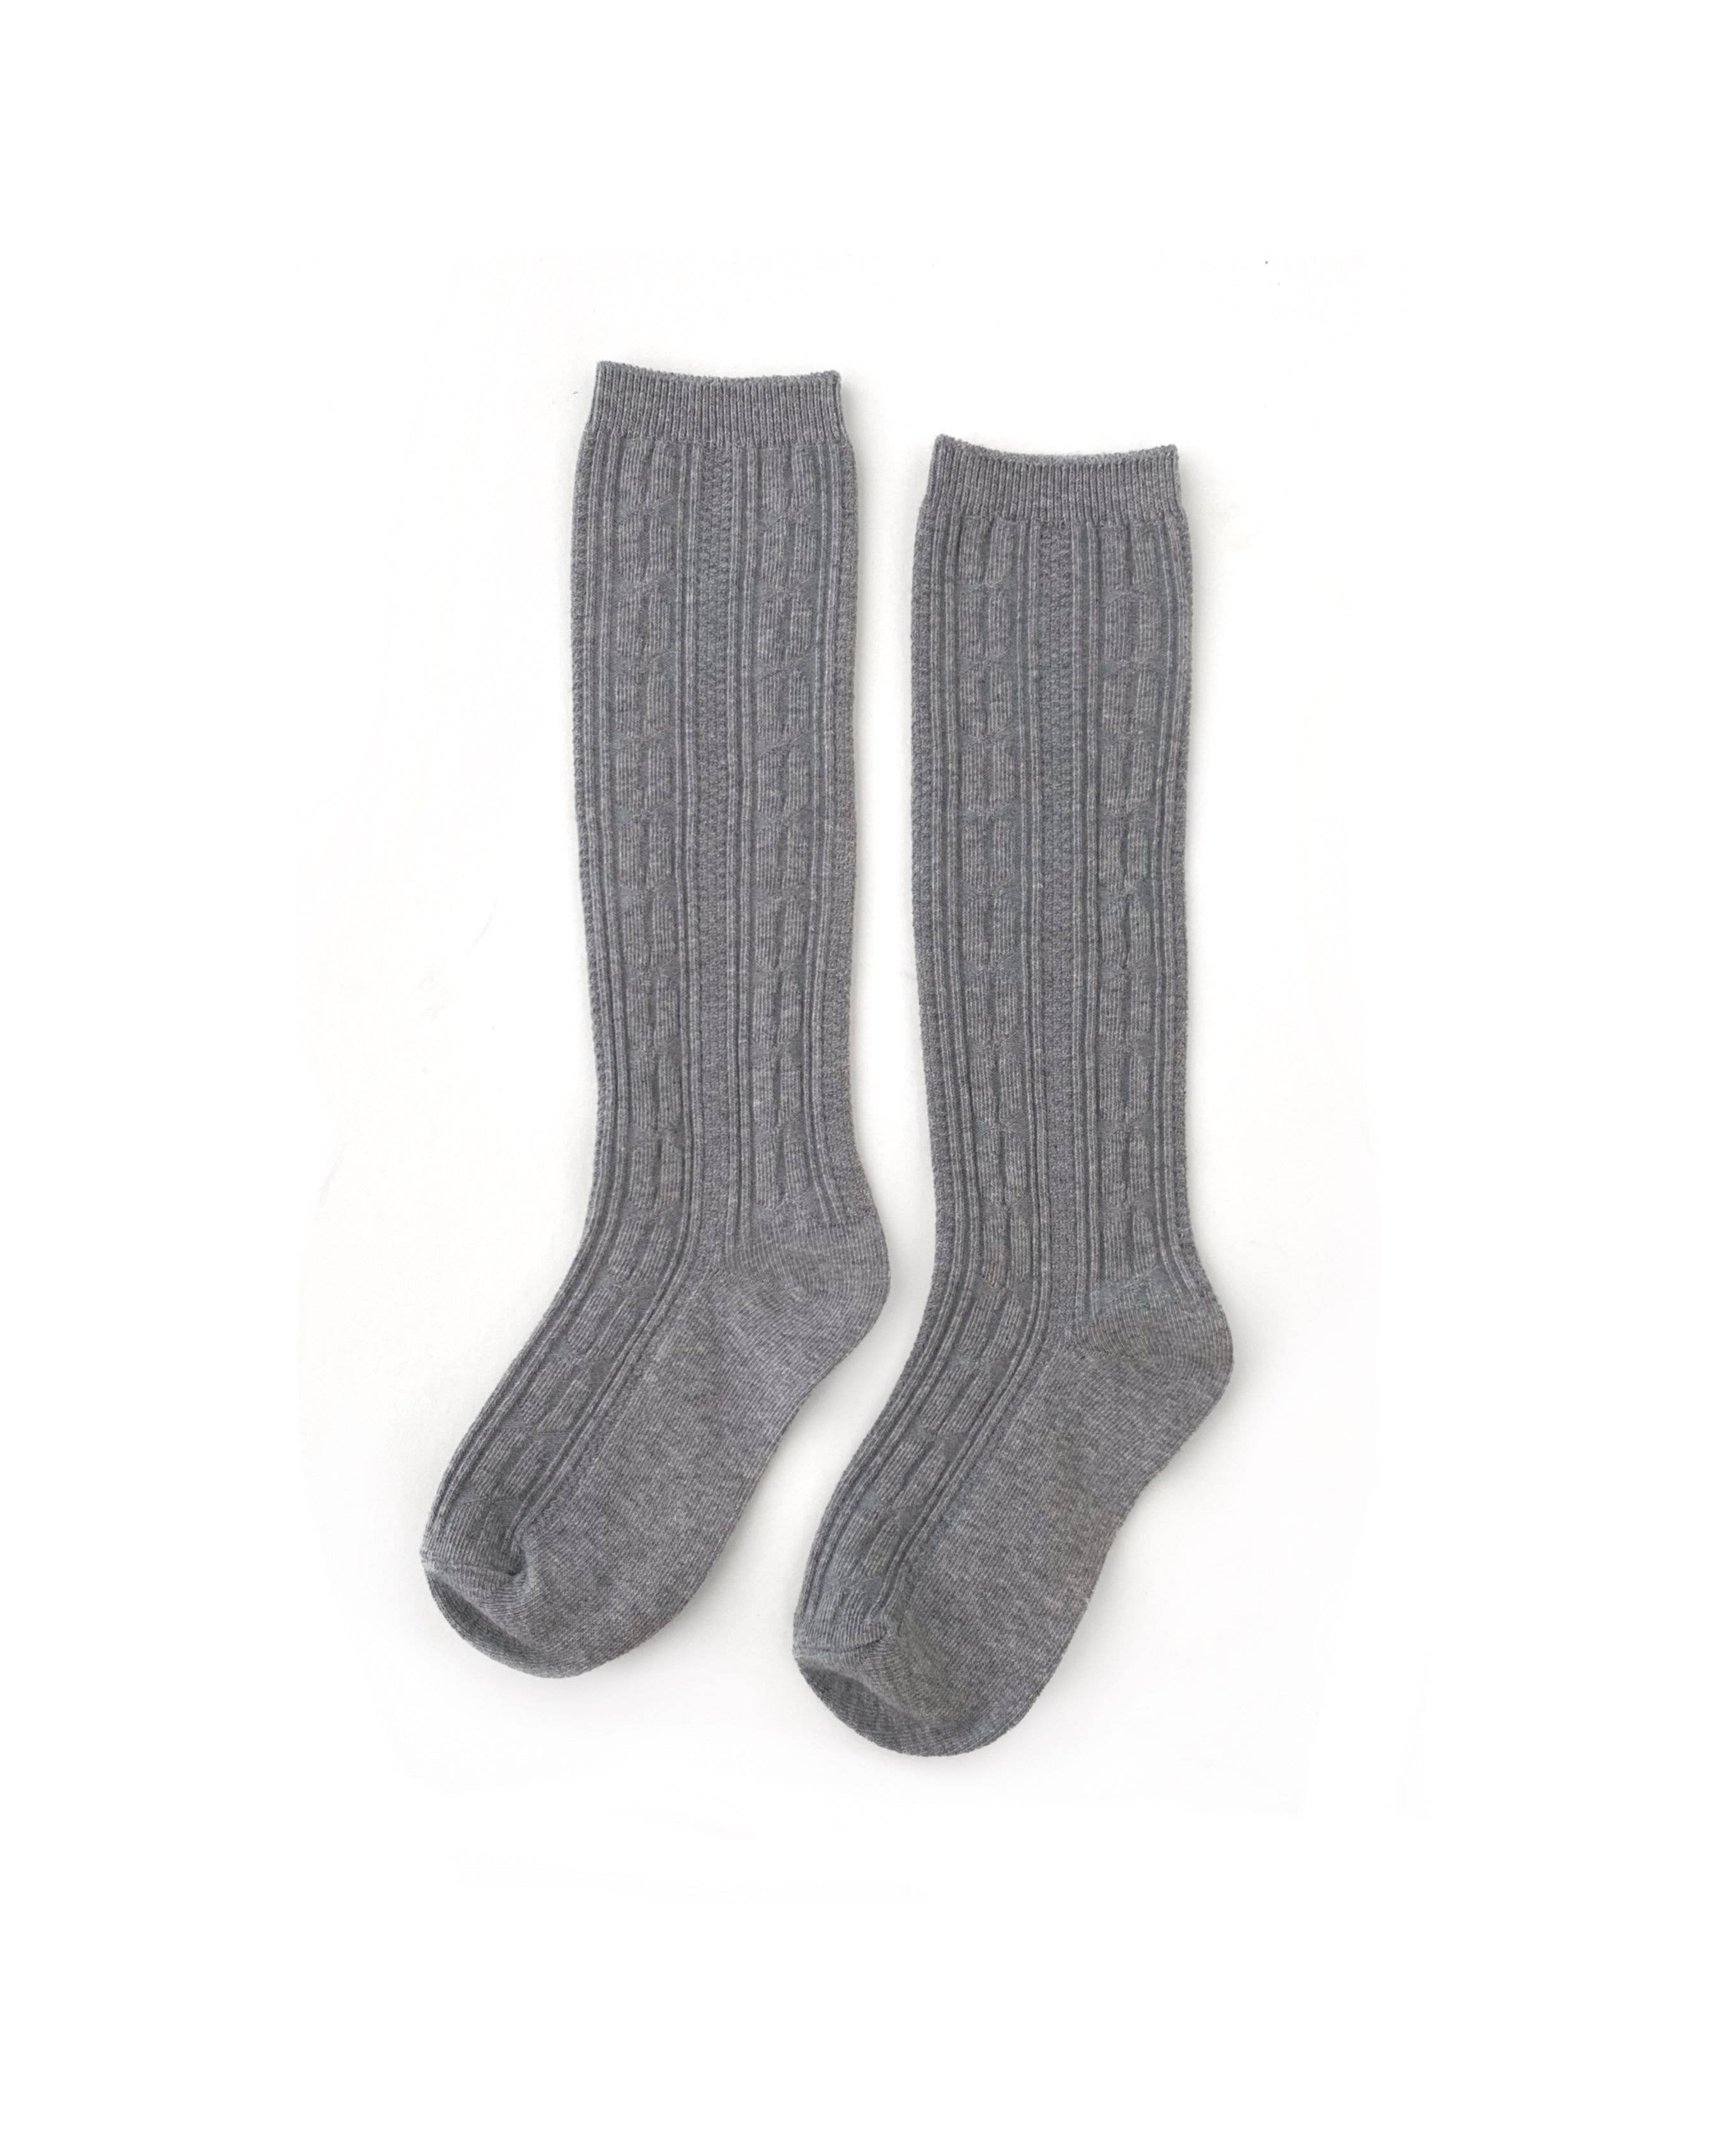 Grey Cable Knit  Knee High Socks  A Touch of Magnolia Boutique   